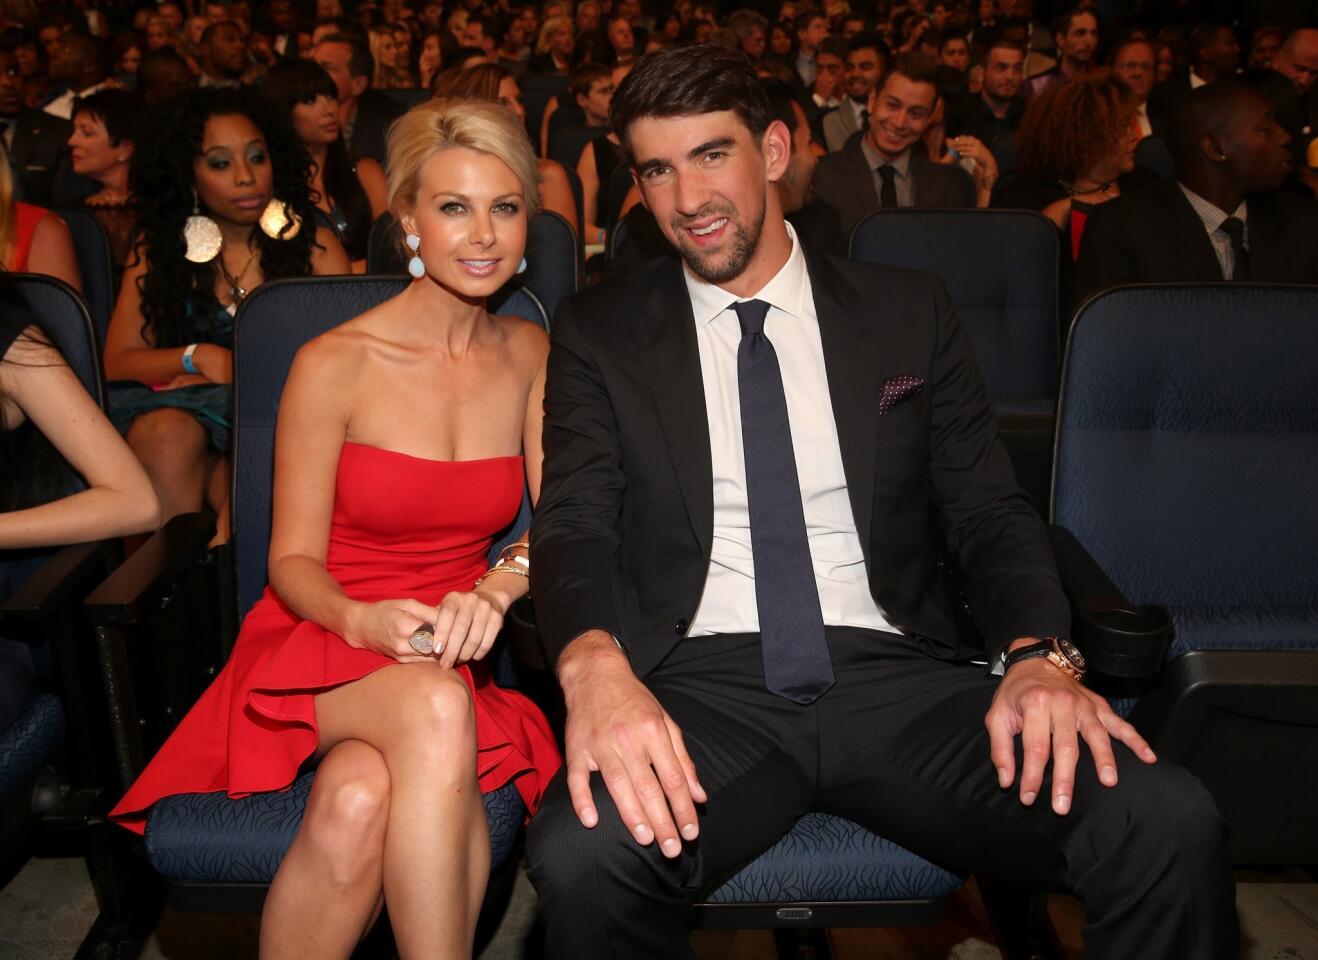 Yes, Michael Phelps has a new love interest. Phelps, 28, stepped out with date Win McMurry, also 28, at Wednesday's ESPY Awards, and we're naturally curious about her. We're assuming you are, too. The pair has reportedly been dating since June. Here's 10 things to know about the Phelps' new lady. --By Jordan Bartel